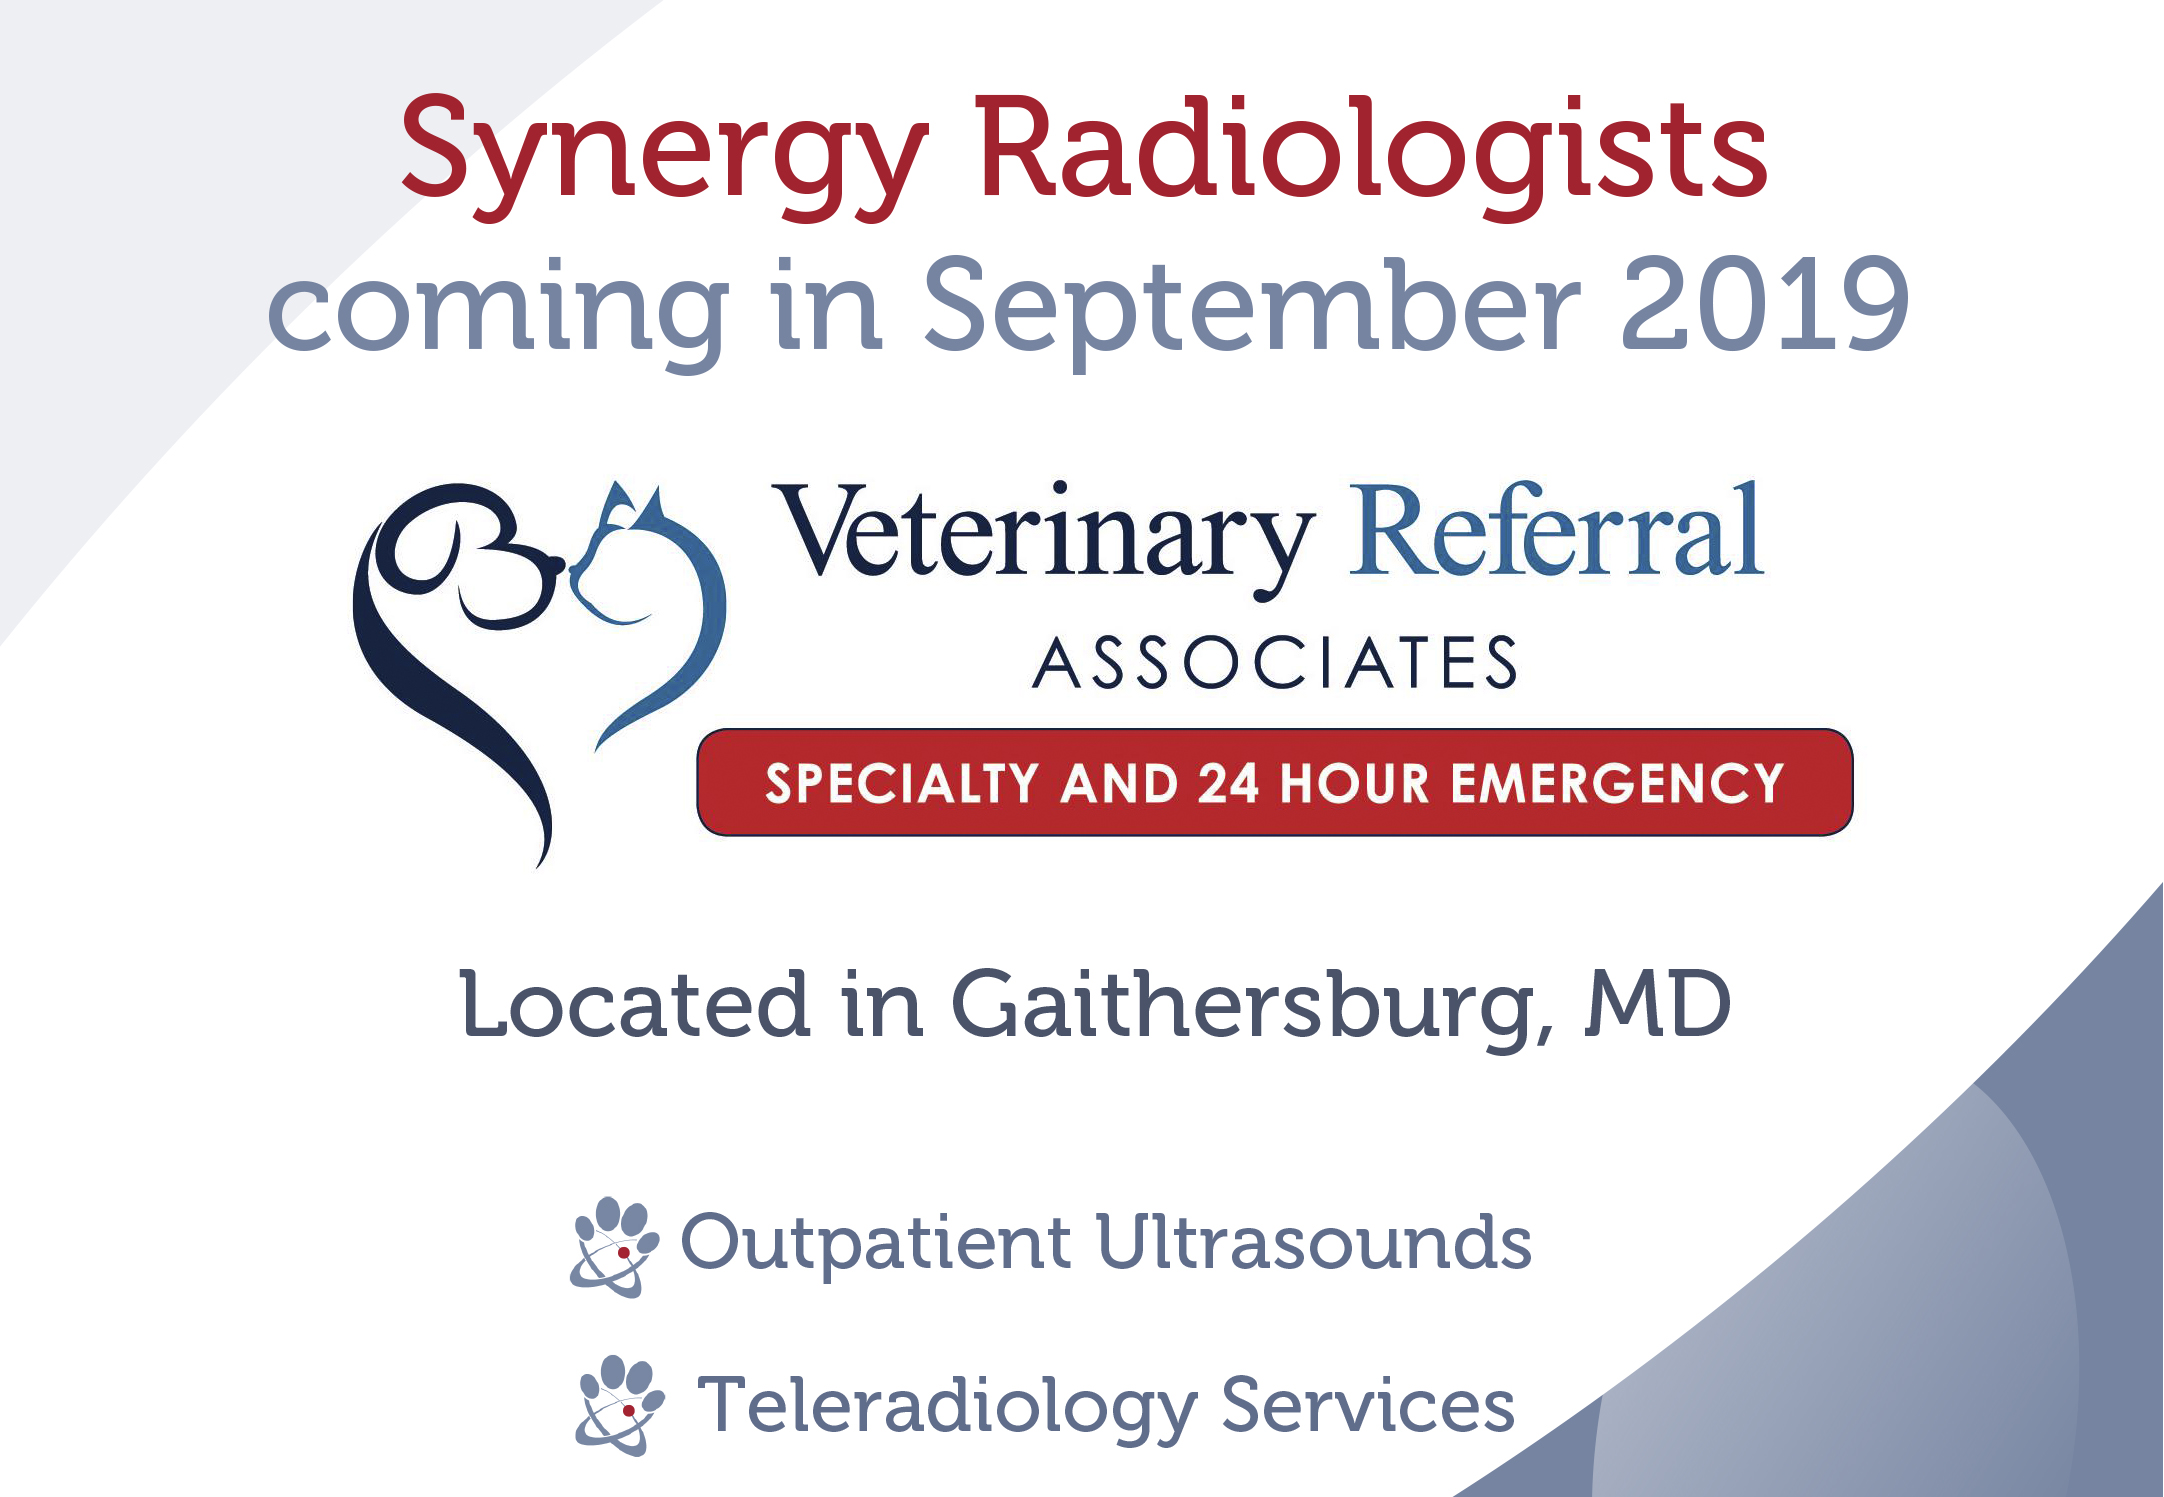 Synergy Radiologists coming to Gaithersburg, Maryland in September 2019! Located in Veterinary Referral Associates